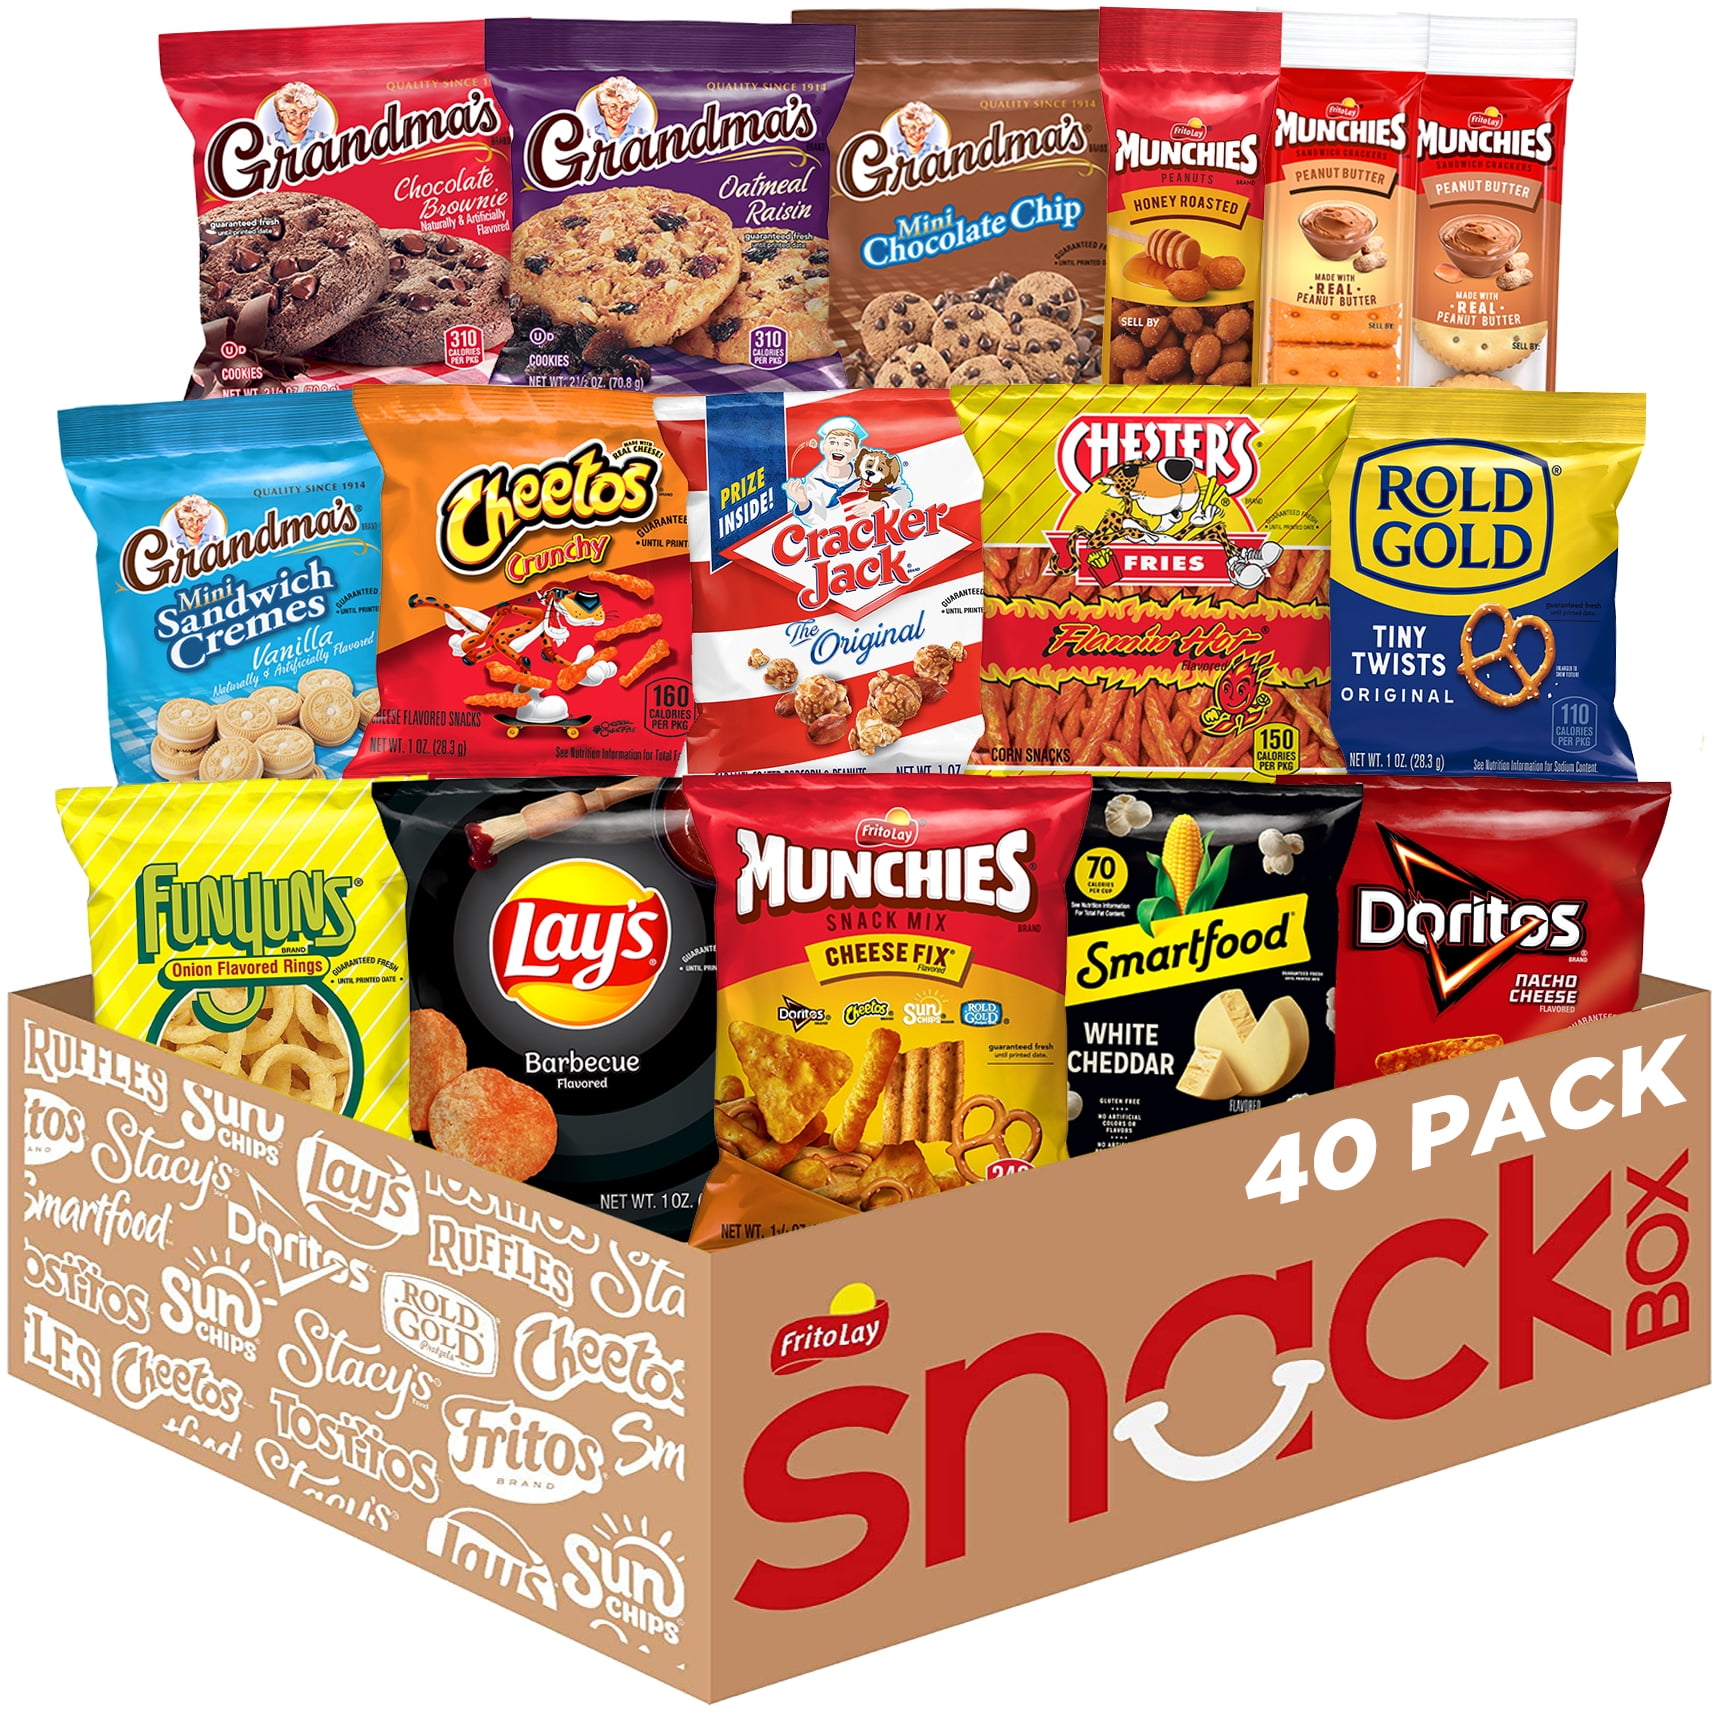 Favorite Snack Box Cookies Chips Candy Snacks Care Package 50 Count Care  Package